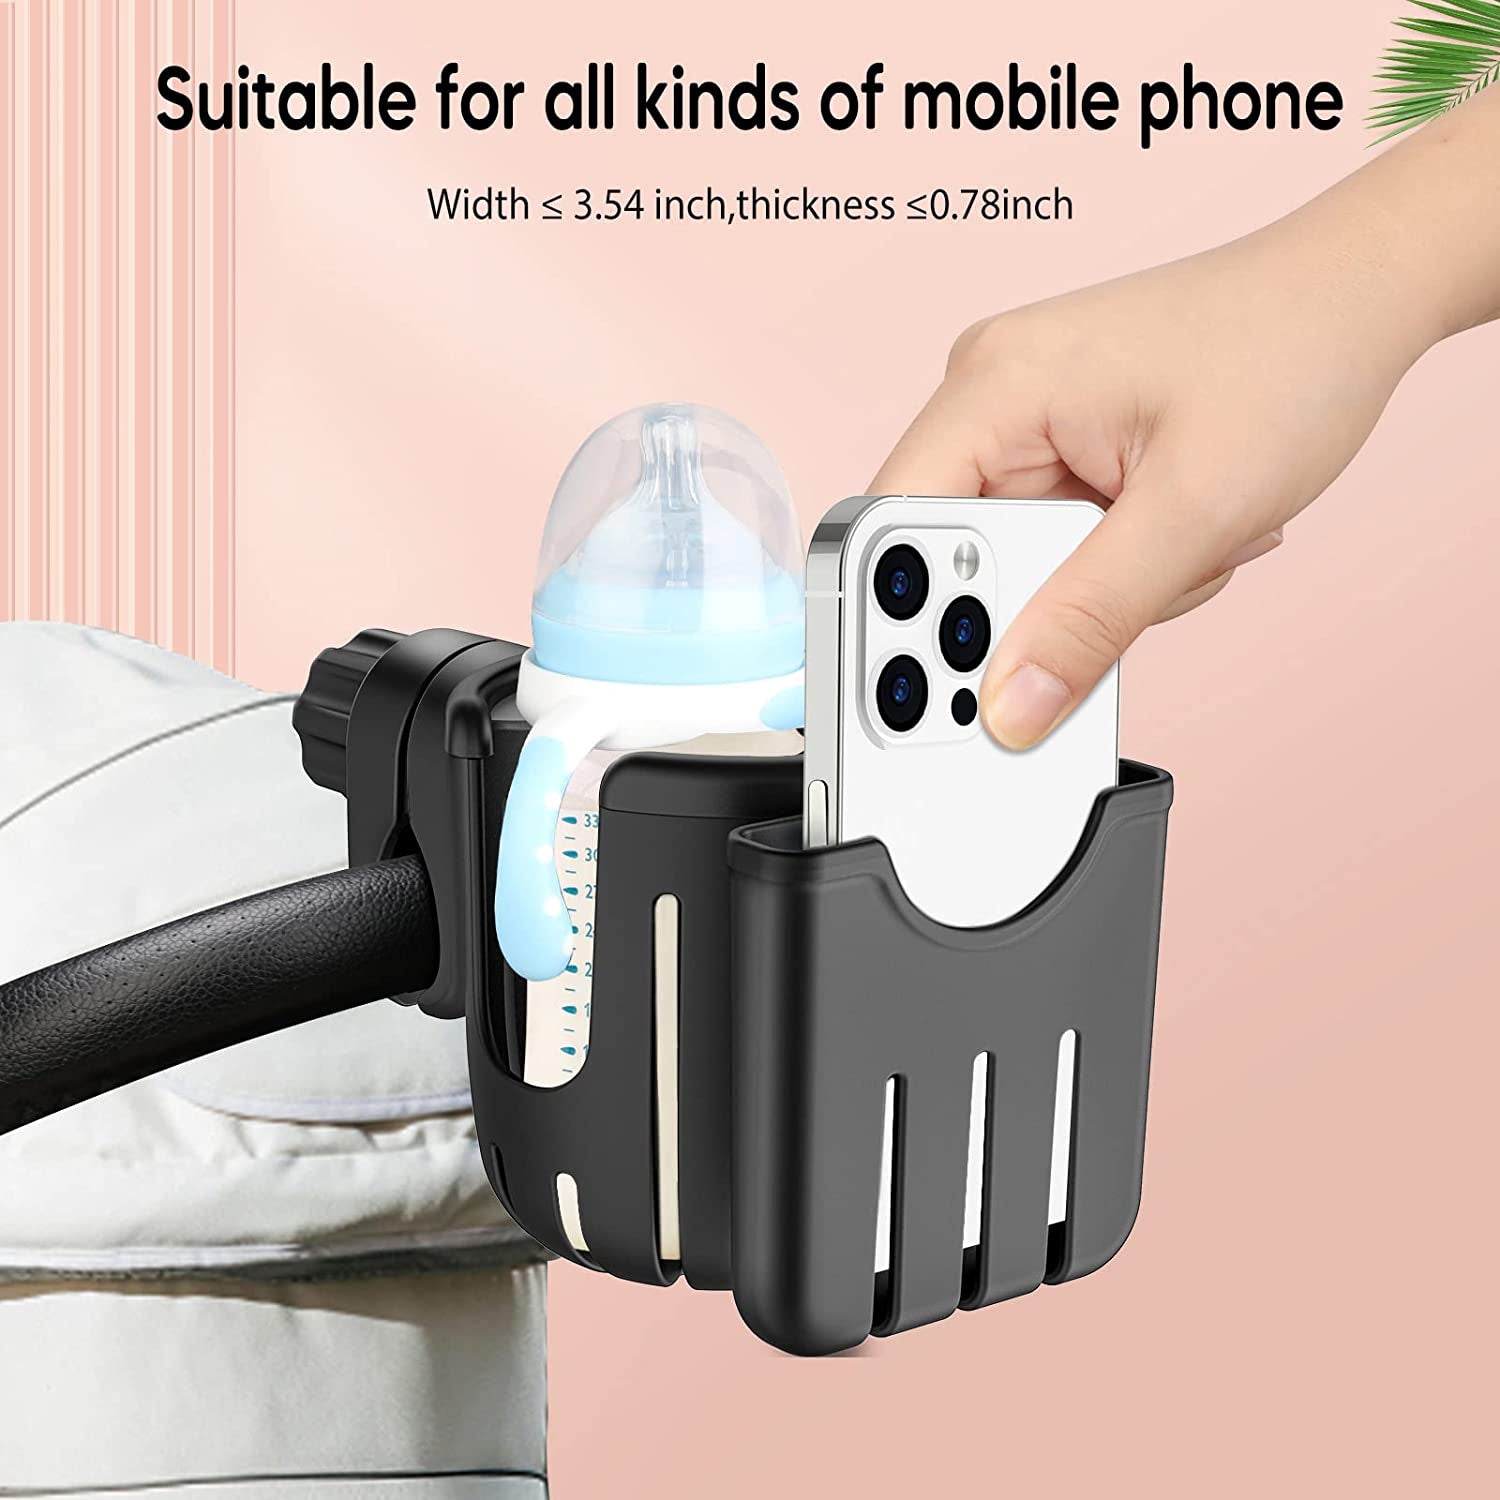 Pram Cup Holder, Universal Pushchair/Stroller Cup Holder, Baby Cup Organizer for Stroller, Drink and Coffee Cup Holder with Phone Holder, Suitable for Buggy, Bike, Wheelchair, Walker (Black-Style 2)